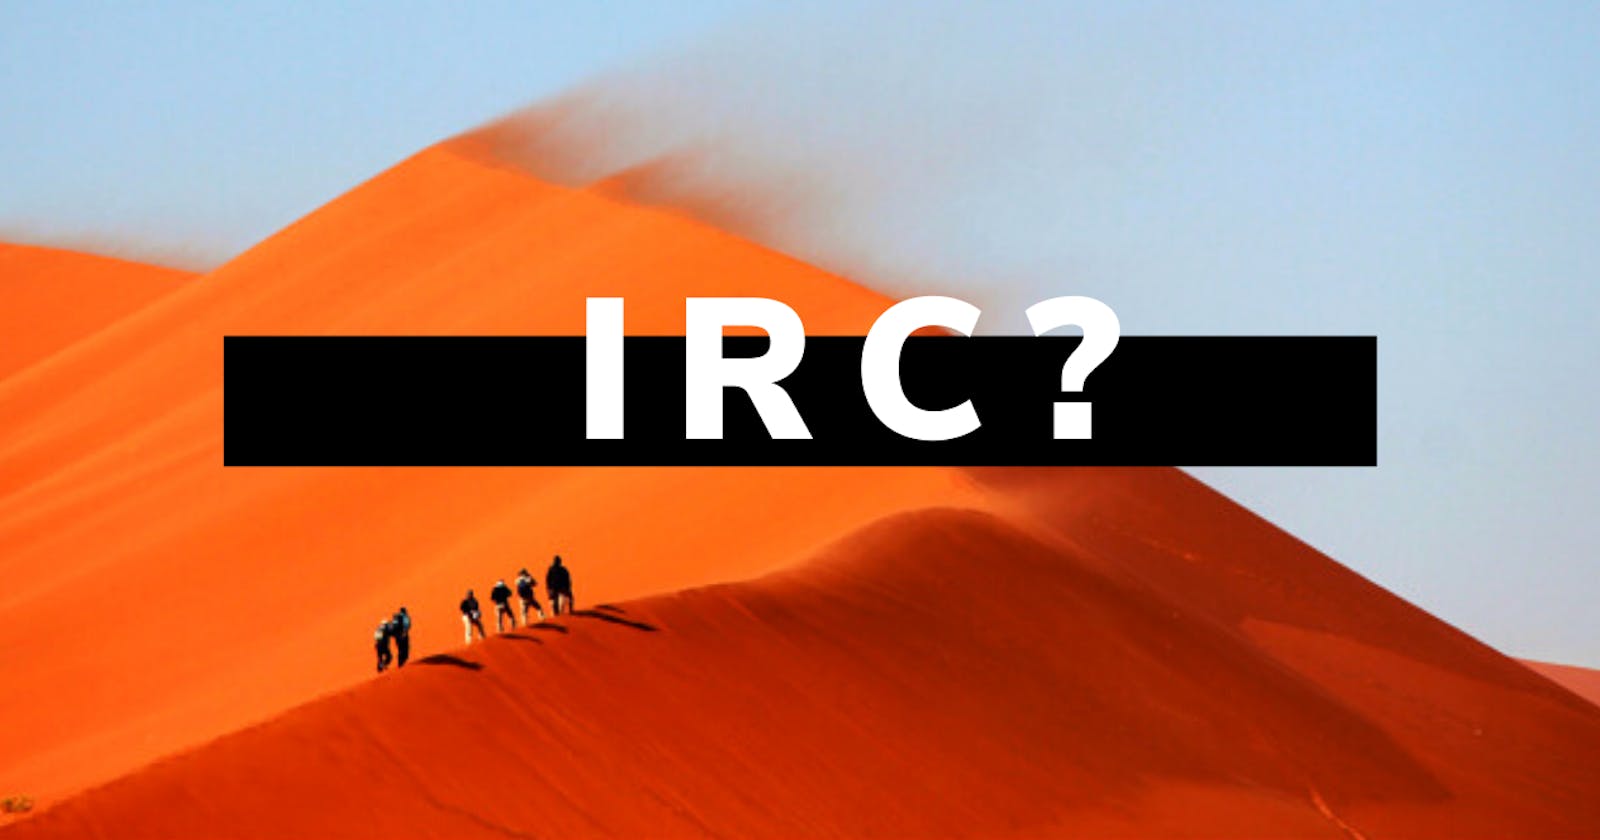 Getting started with IRC